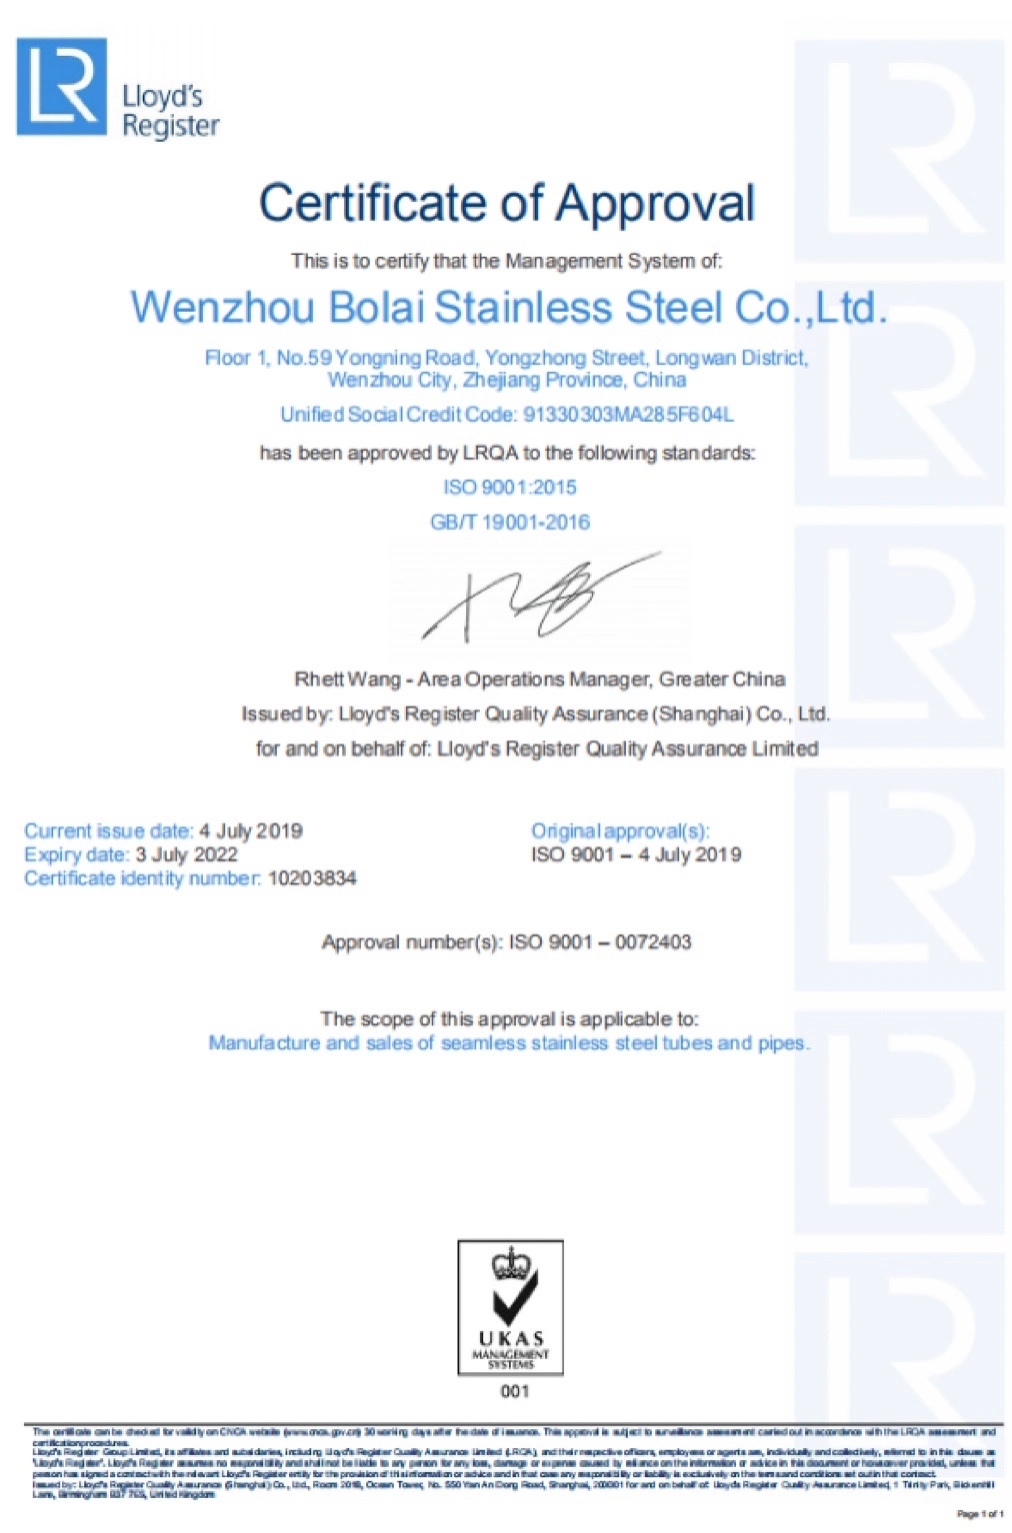 304 Lined Stainless Steel Composite Pipe for Water Conveyance